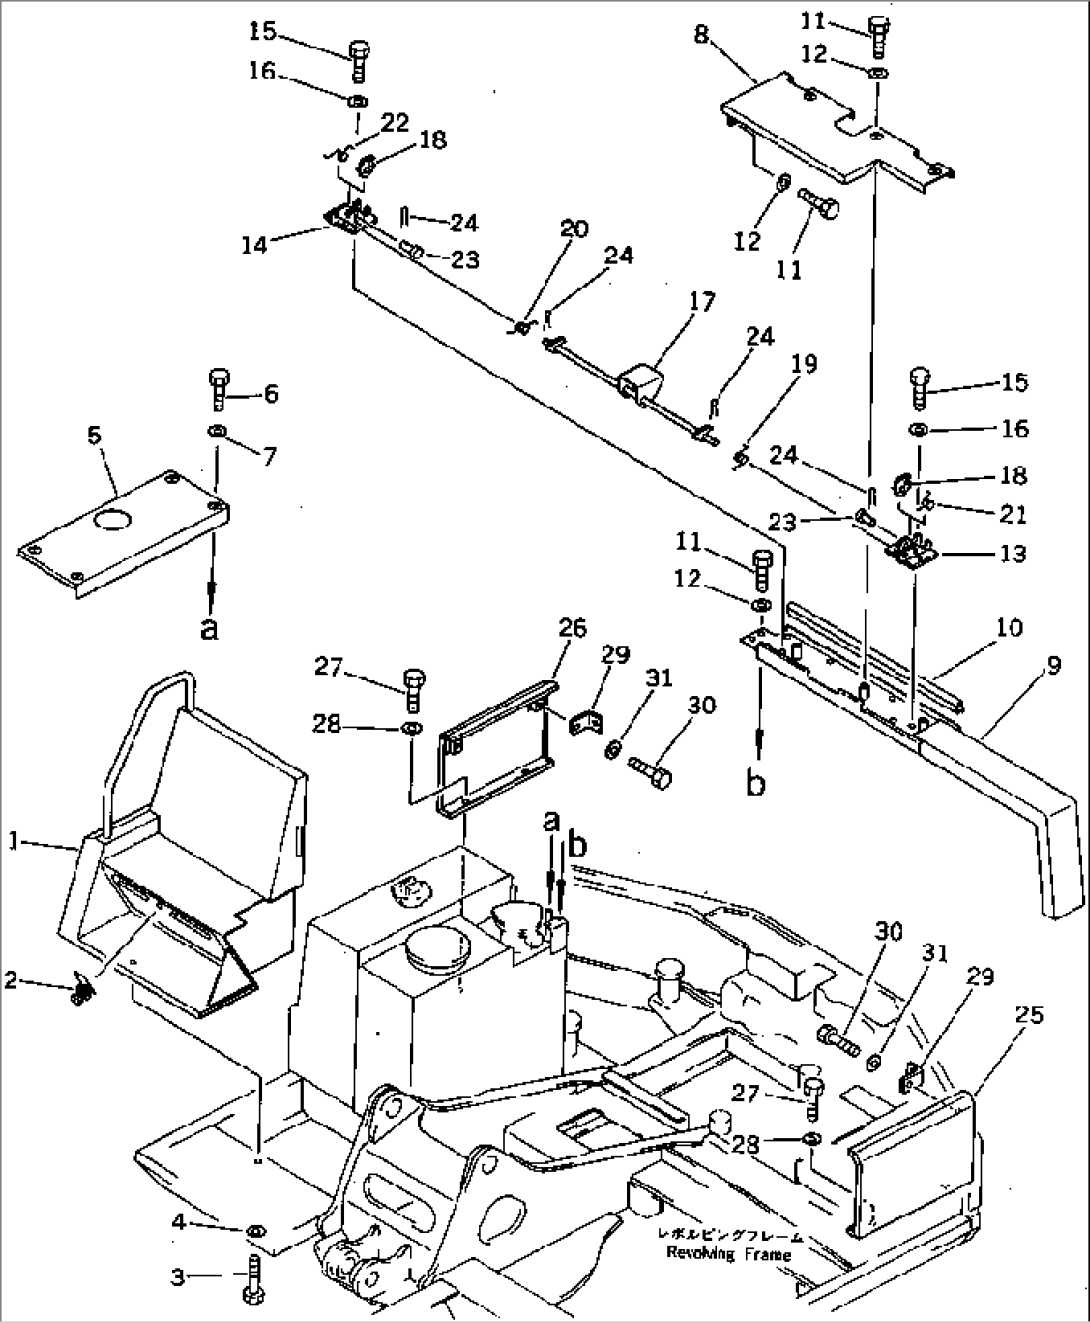 MACHINERY COMPARTMENT (2/3)(#2001-2031)